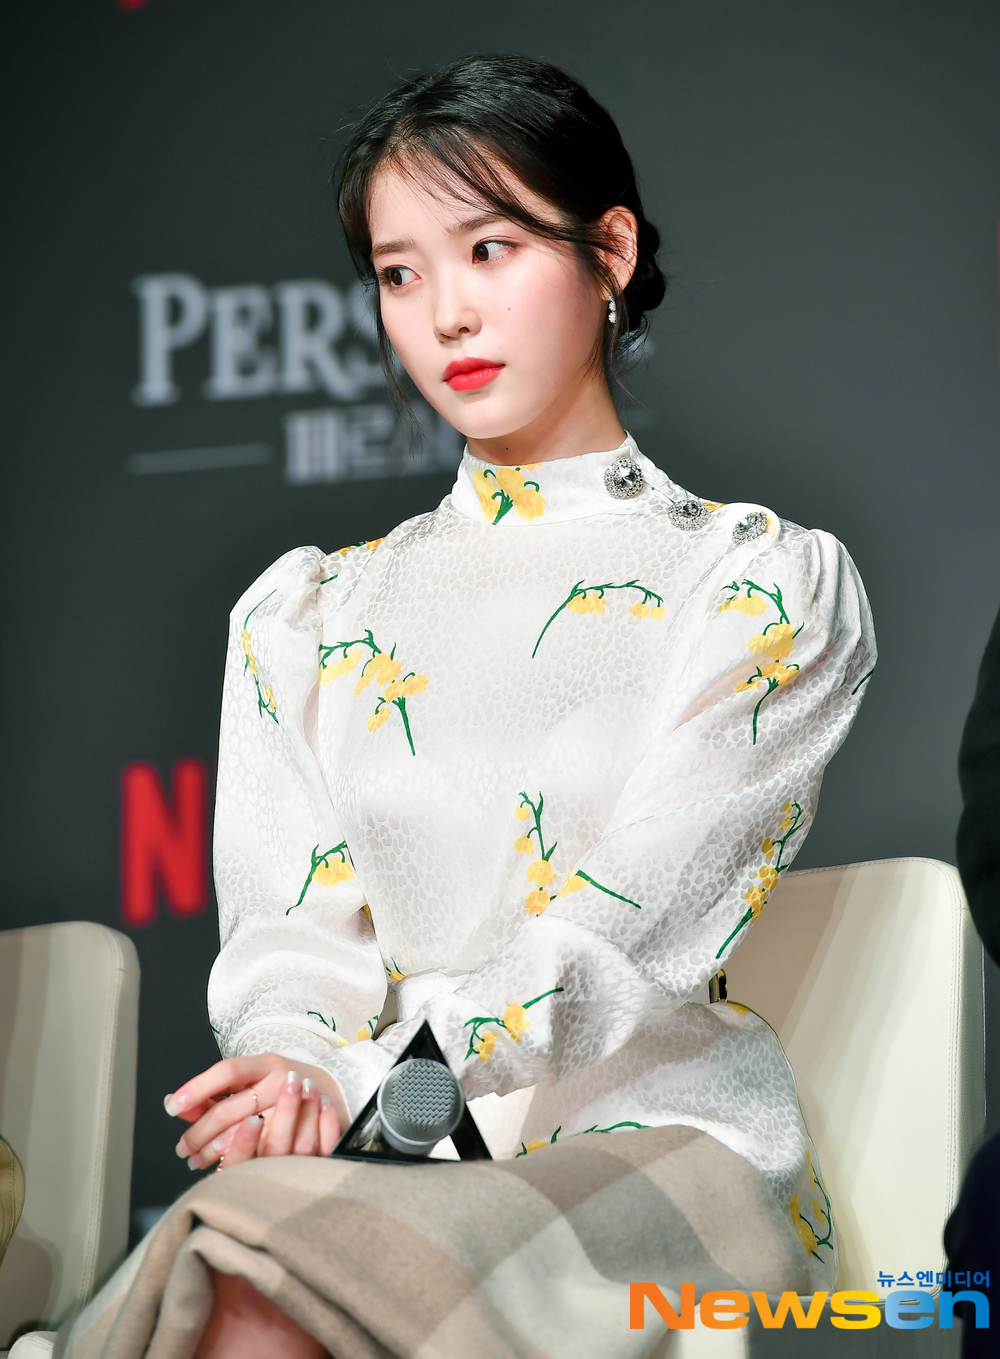 The Netflix original series Persona production meeting was held in Conrad Seoul, Yeouido on the morning of March 27th.On this day, Lee Ji-eun (IU), Yoon Jong-shin, Im Pil-sung, Jeon Go-un and Kim Jong-kwan attended.Persona consists of four works made by four directors who are full of talent and Personality.In it, one muse turns into four Personas, sometimes cute and sometimes strangely talk about life and love.Lee Jae-ha